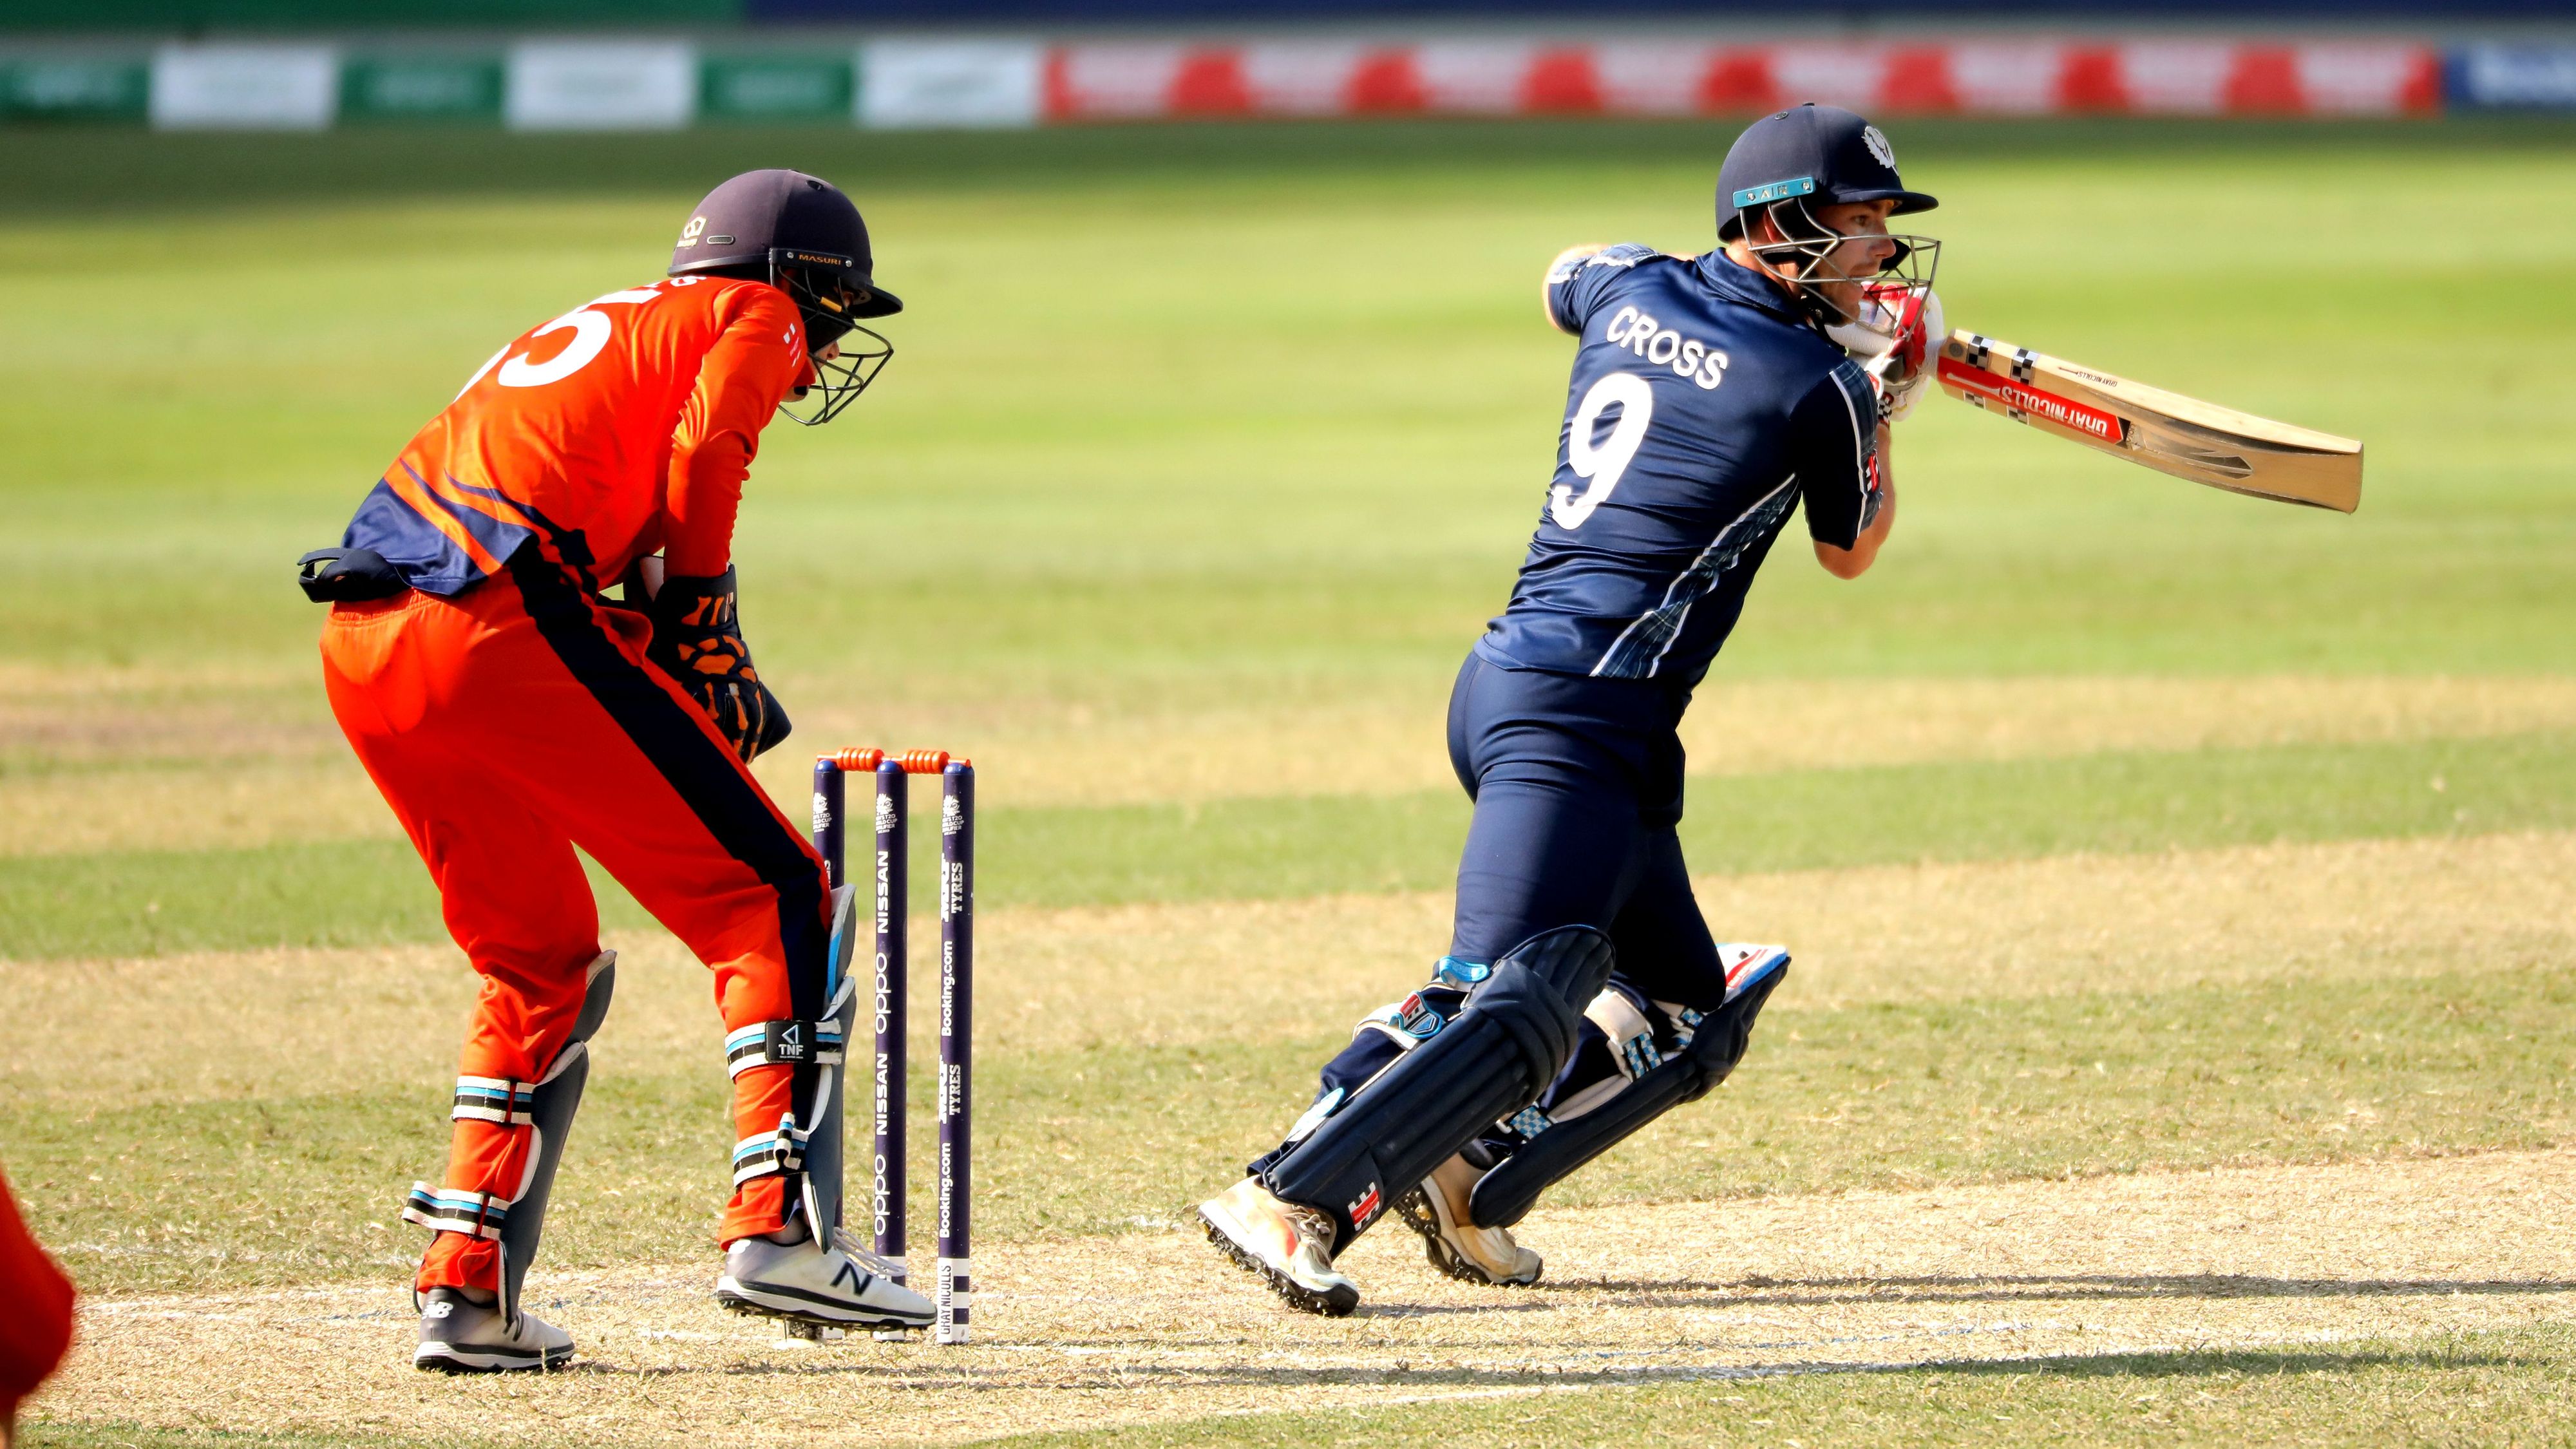 Scotland seal 4th place in Group A of ICC Men’s T20 World Cup Qualifier